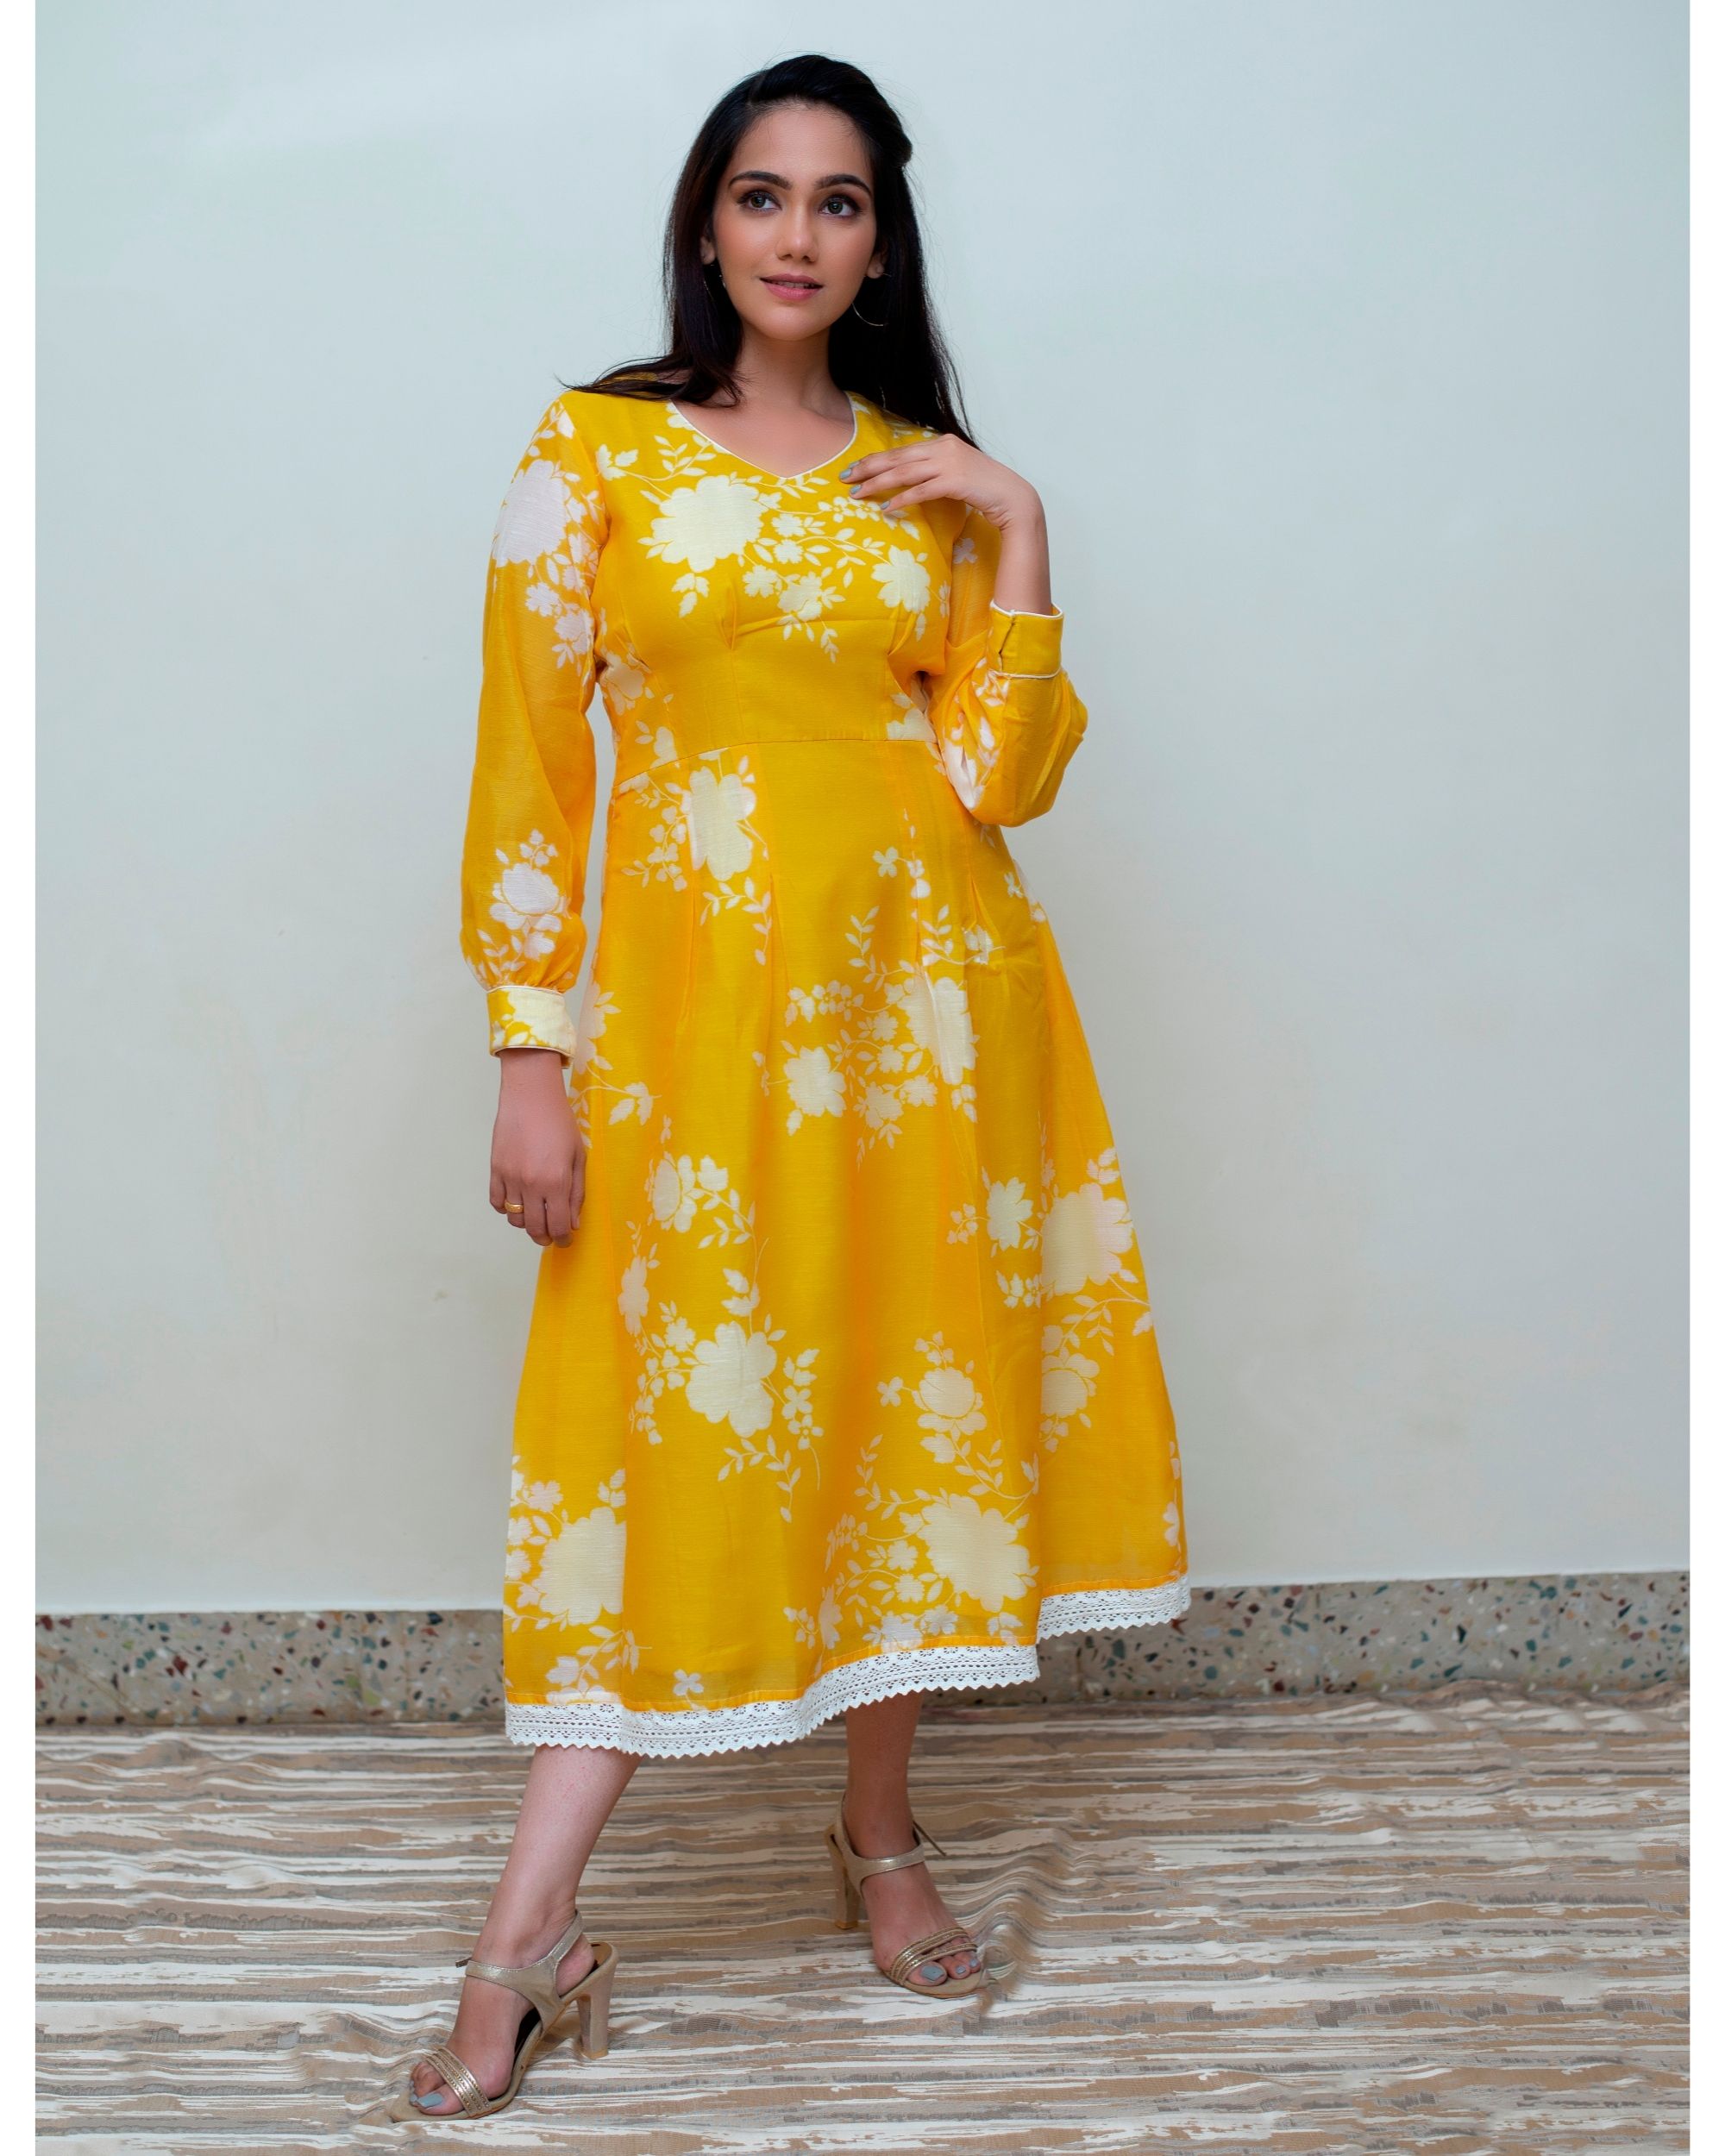 Yellow floral balloon sleeve dress by Label Hina Jain | The Secret Label